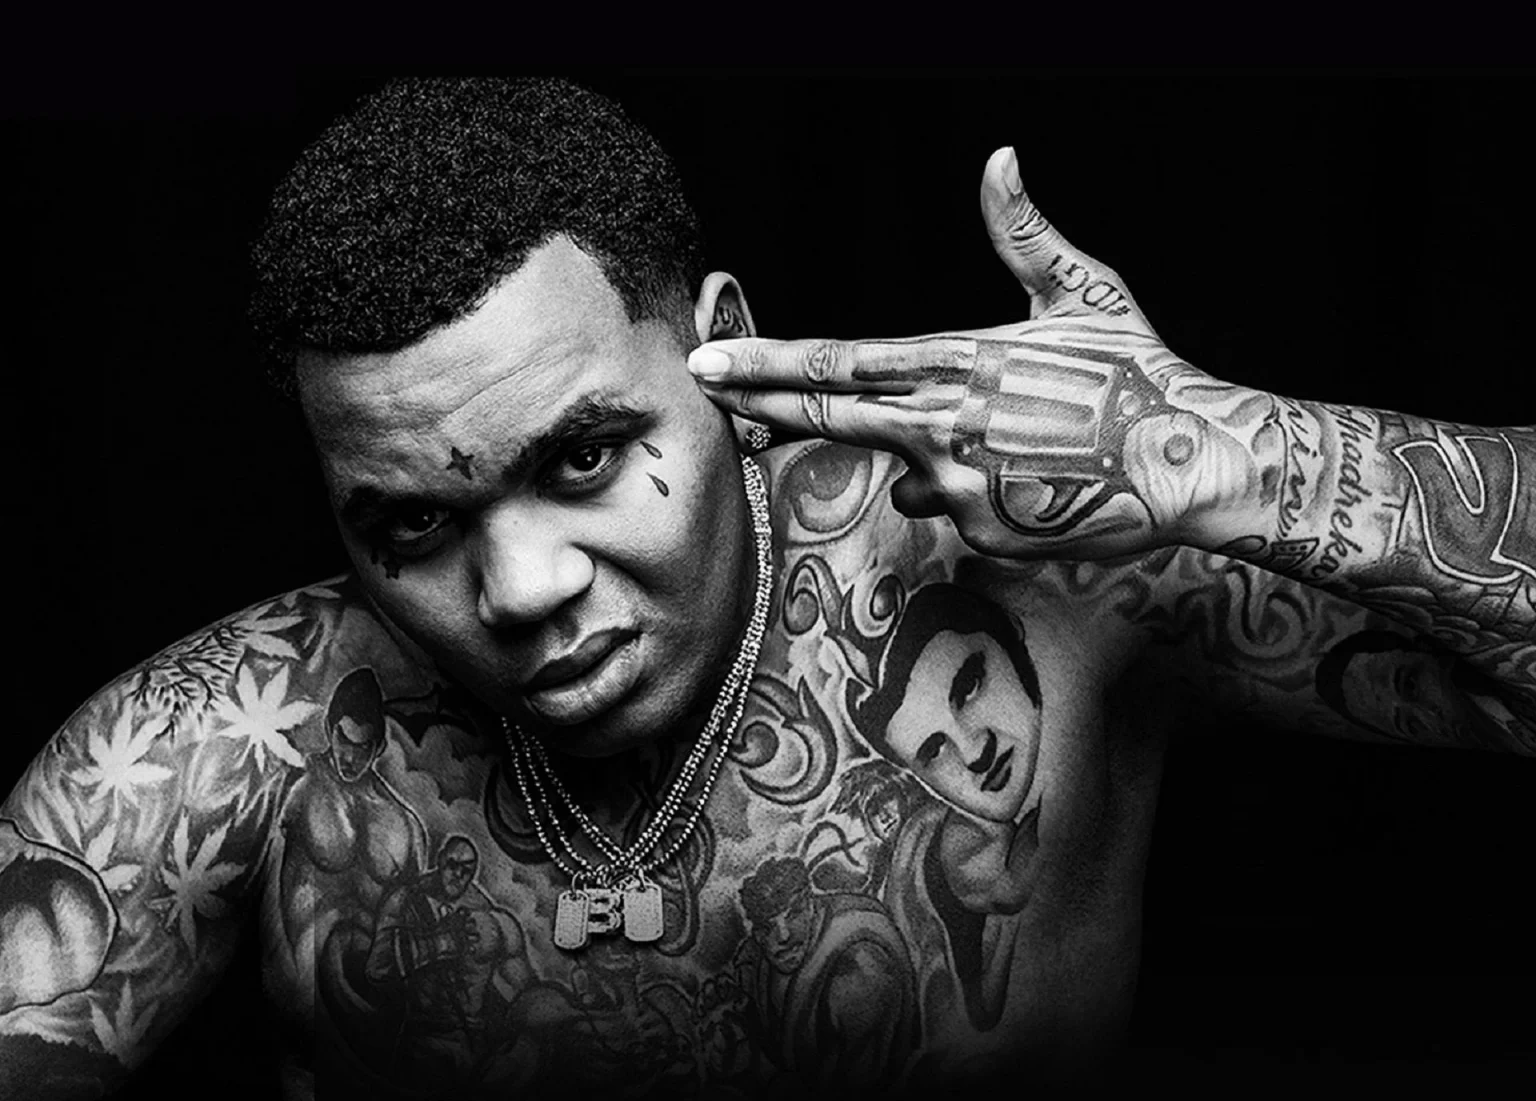 Kevin Gates Quotes about Life.